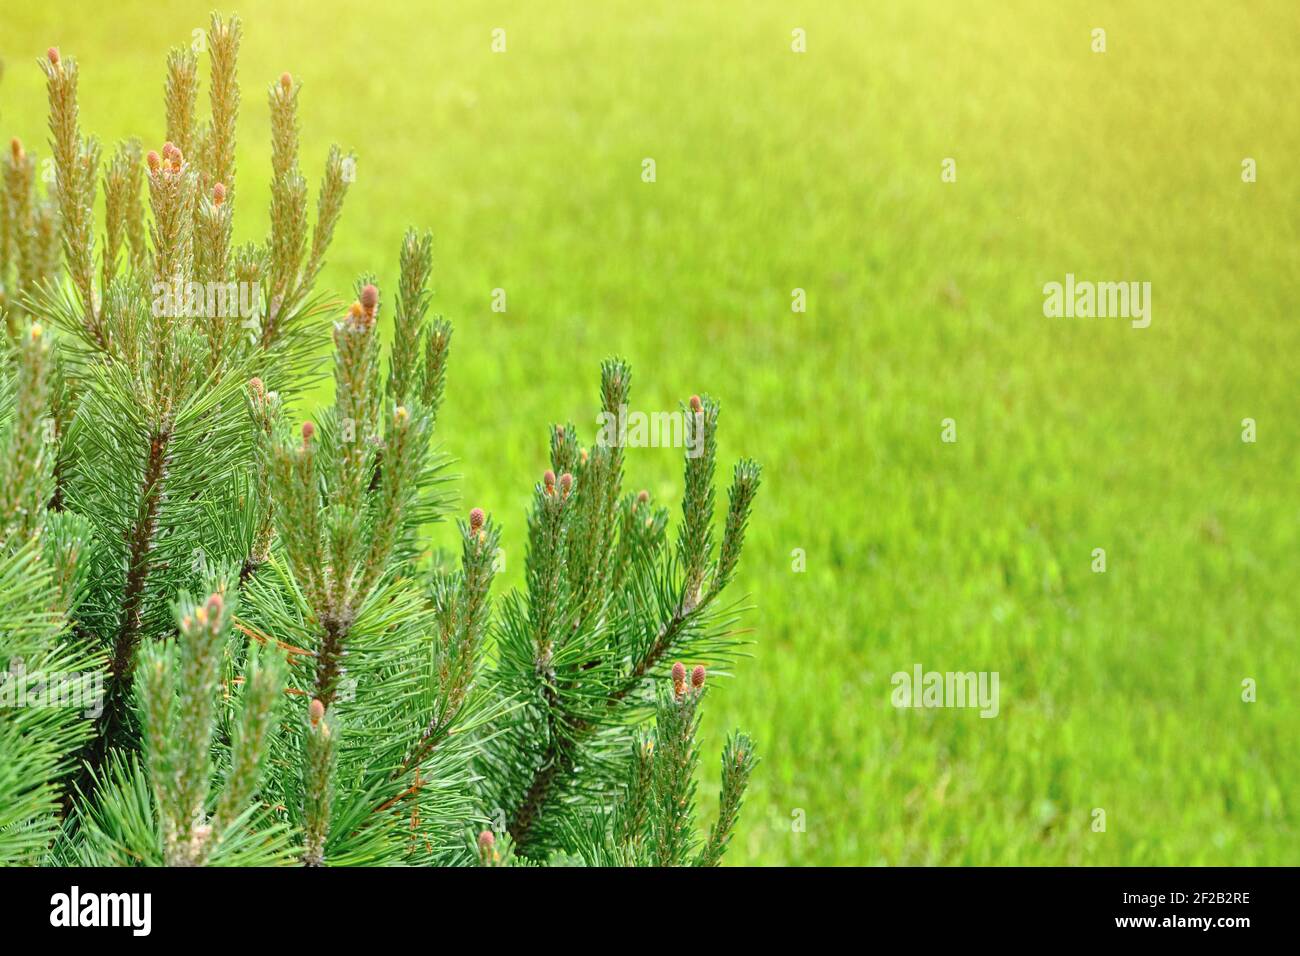 Background branches of young spruce on summer grass, copy space Stock Photo